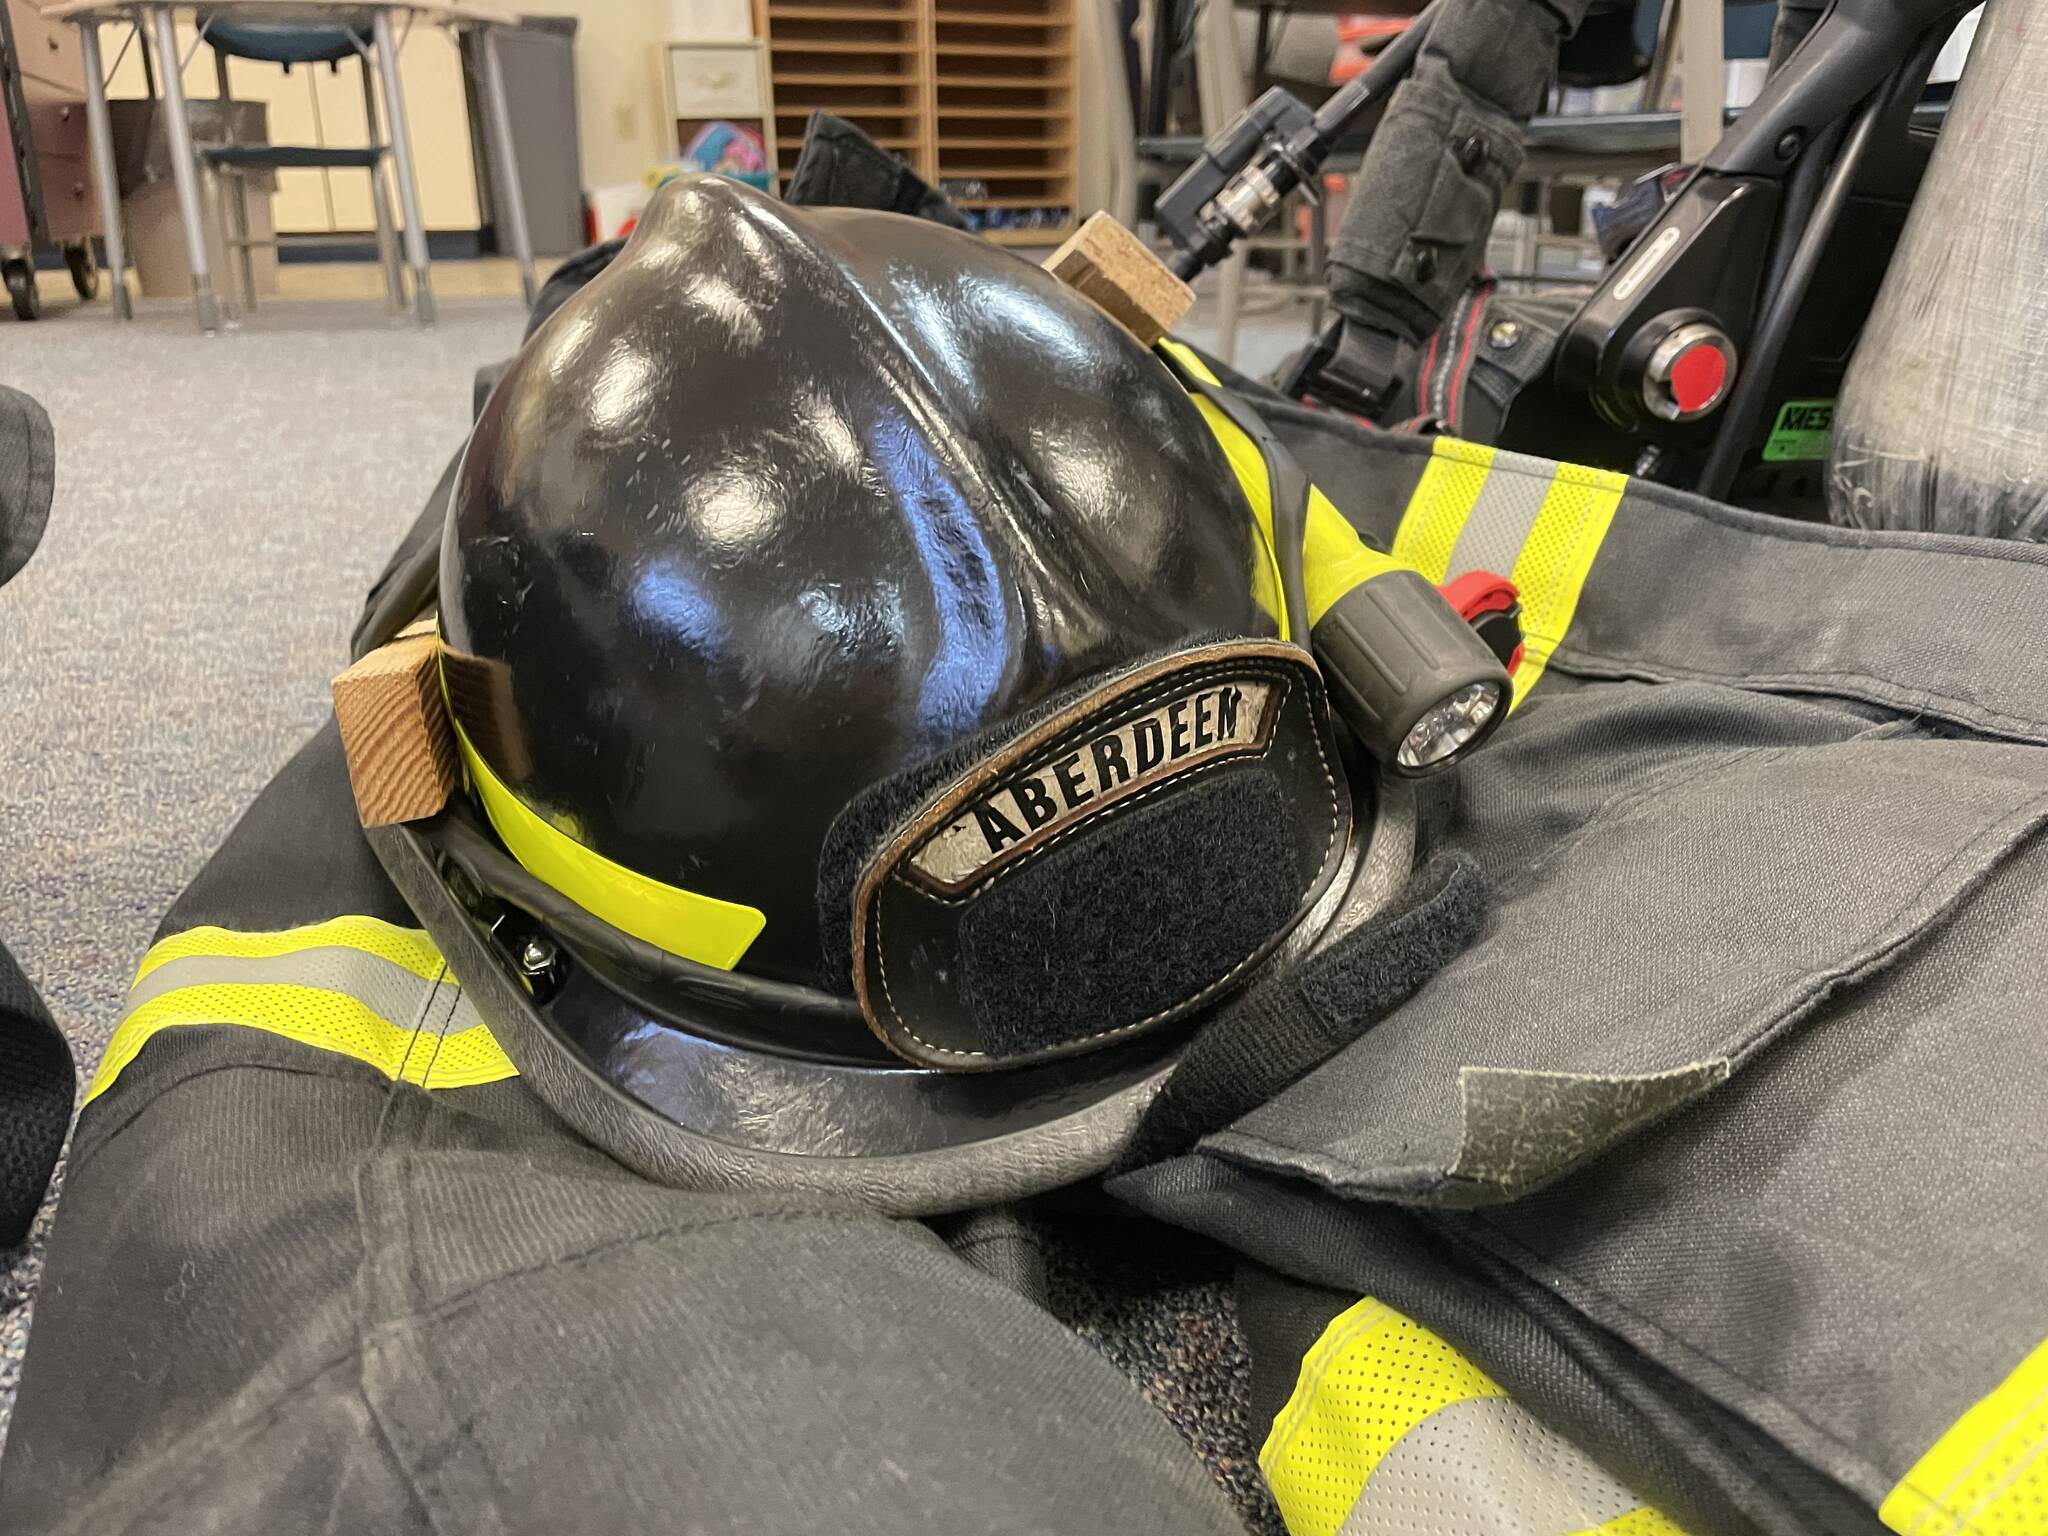 Firefighters from the Aberdeen Fire Department visited McDermoth Elementary School for a Fire Prevention Week presentation on Monday.
Michael S. Lockett | The Daily World